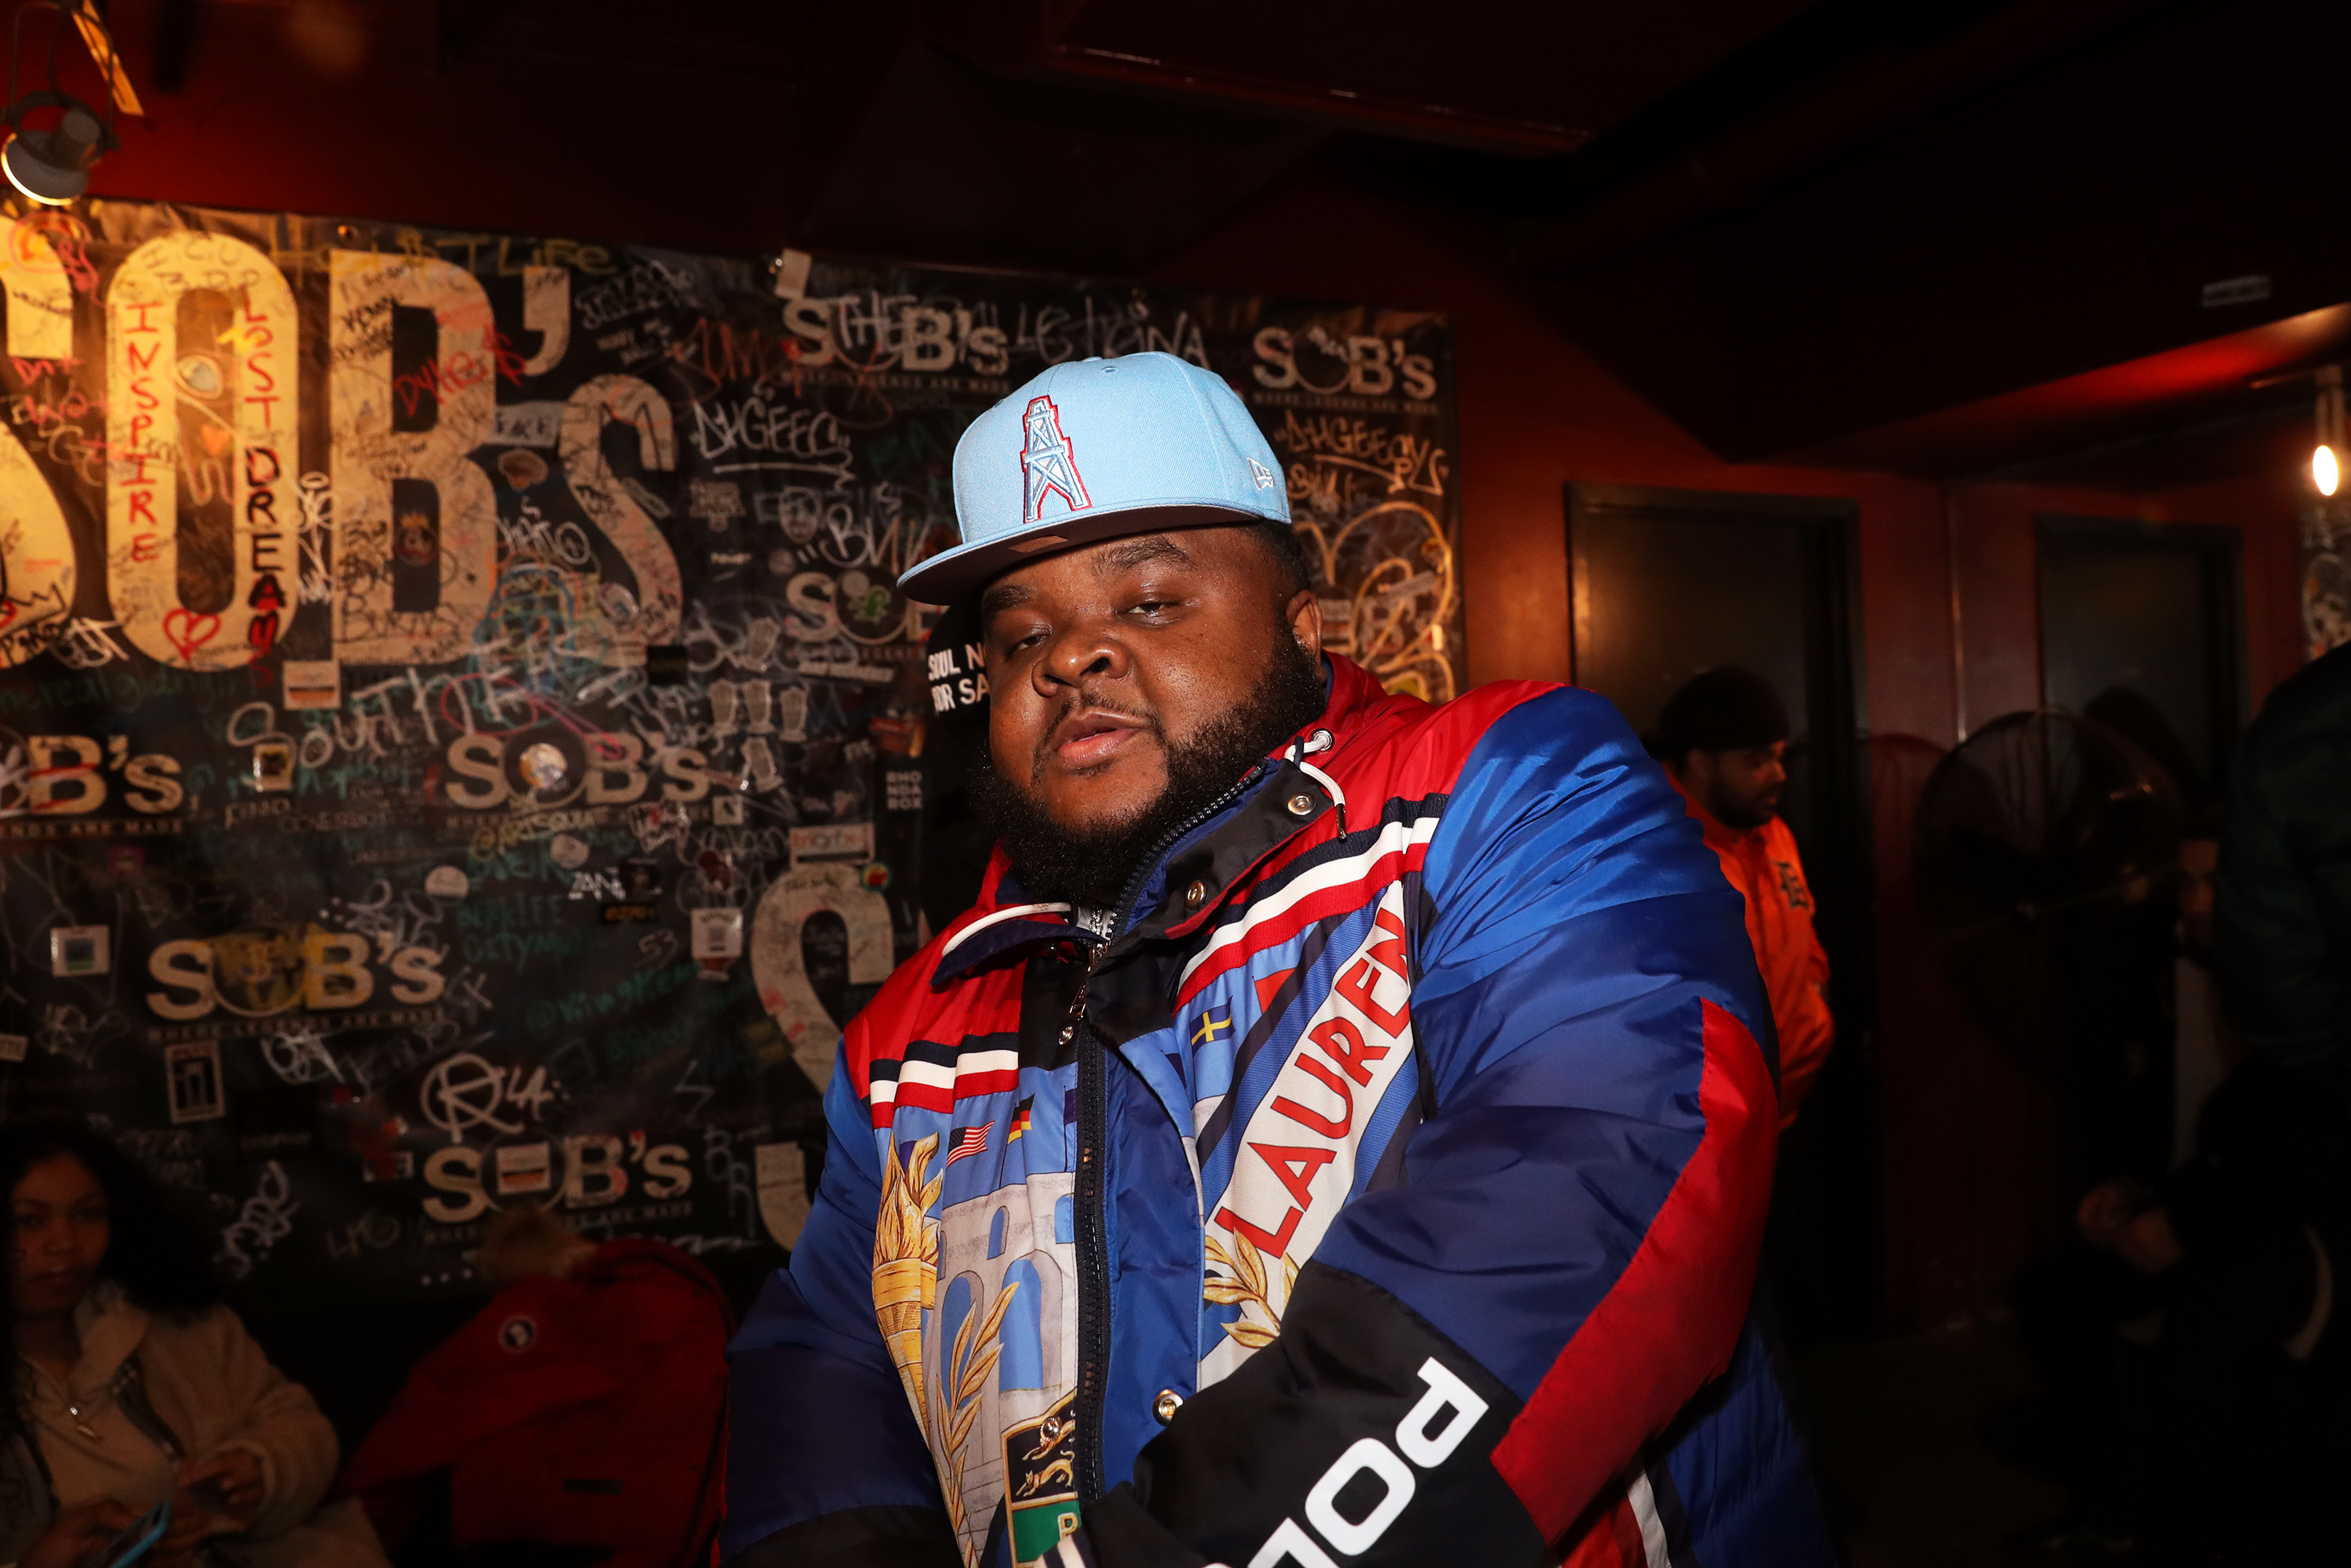 <p>Fred The Godson, a Bronx-based rapper and hip-hop radio fixture, revealed on April 6 that he'd been hospitalized after contracting COVID-19. On April 23, Fred (real name: Frederick Thomas) died from complications of the coronavirus, his rep confirmed. He was 35.</p>